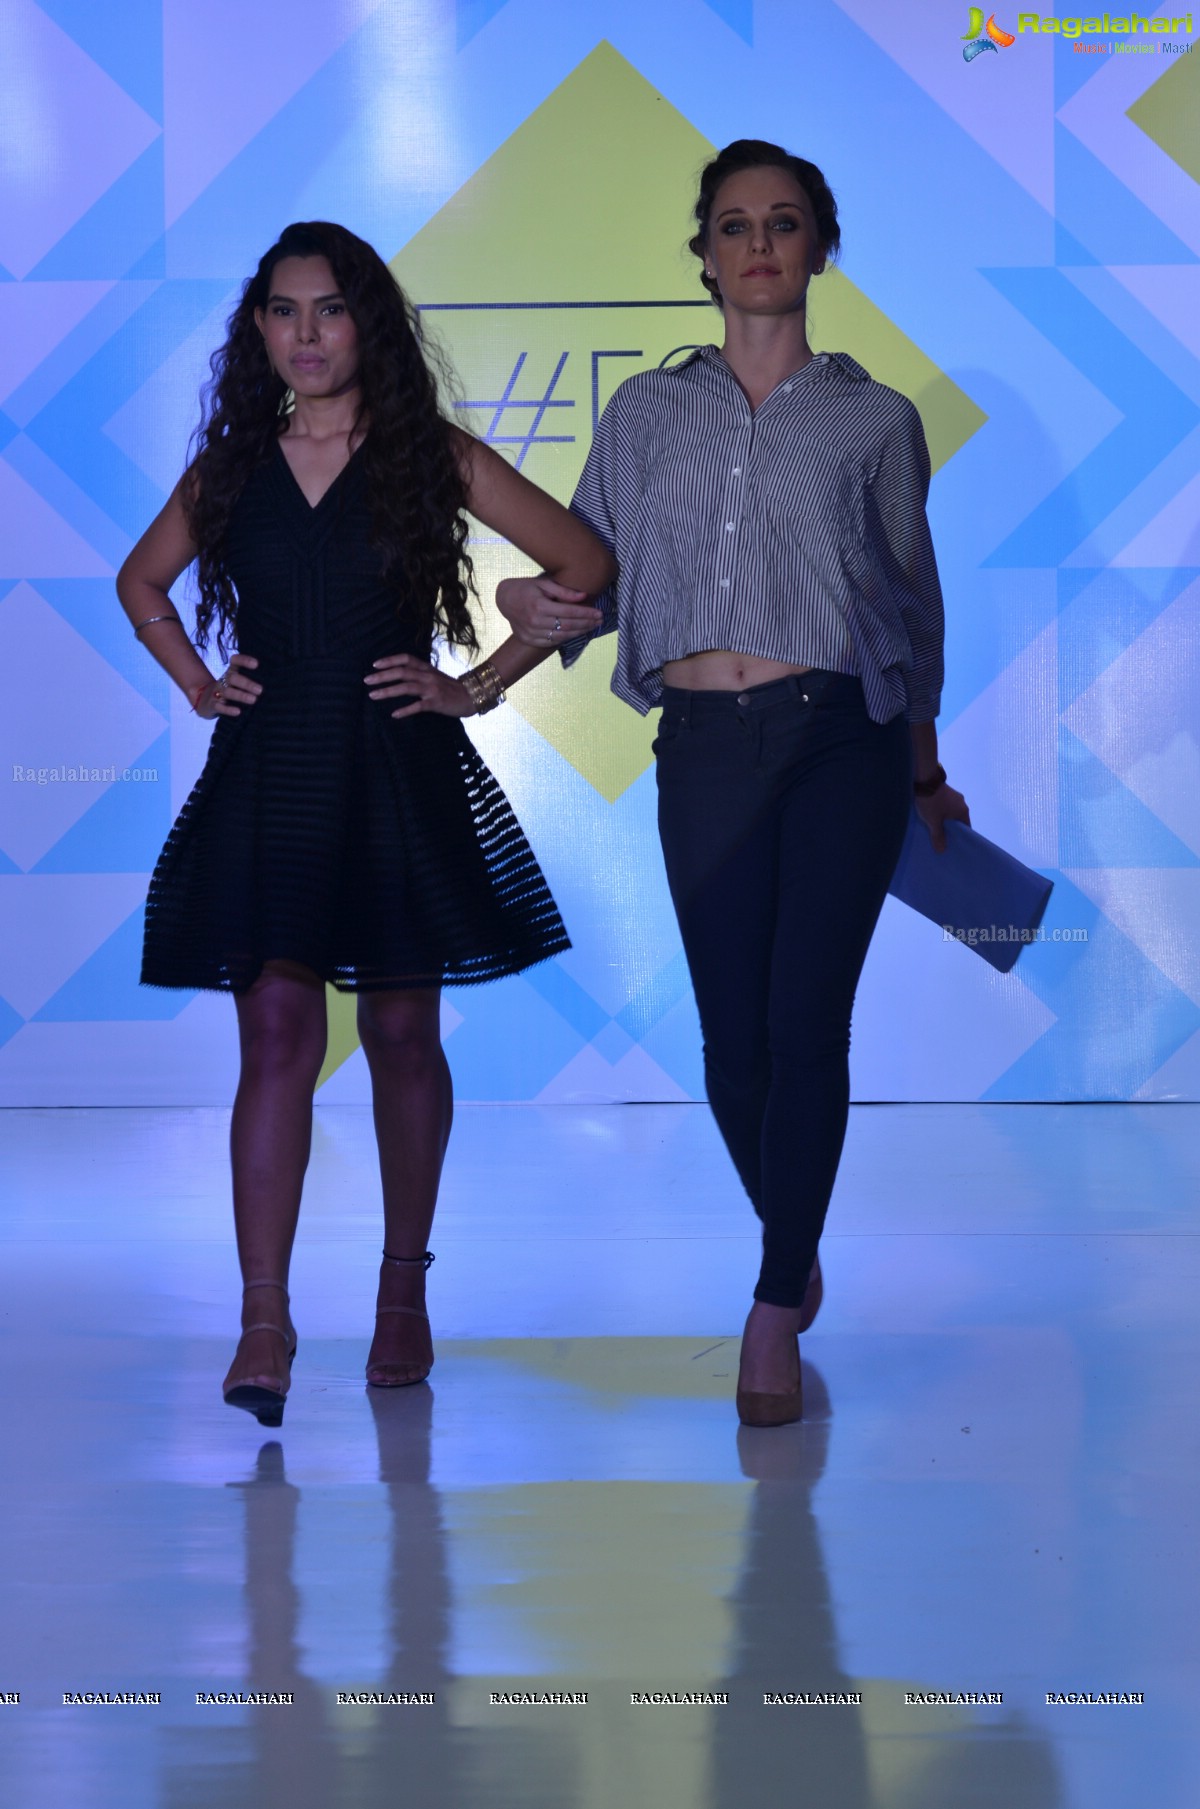 #F21 Fashionista with Taapsee Pannu at Forum Mall, Hyderabad